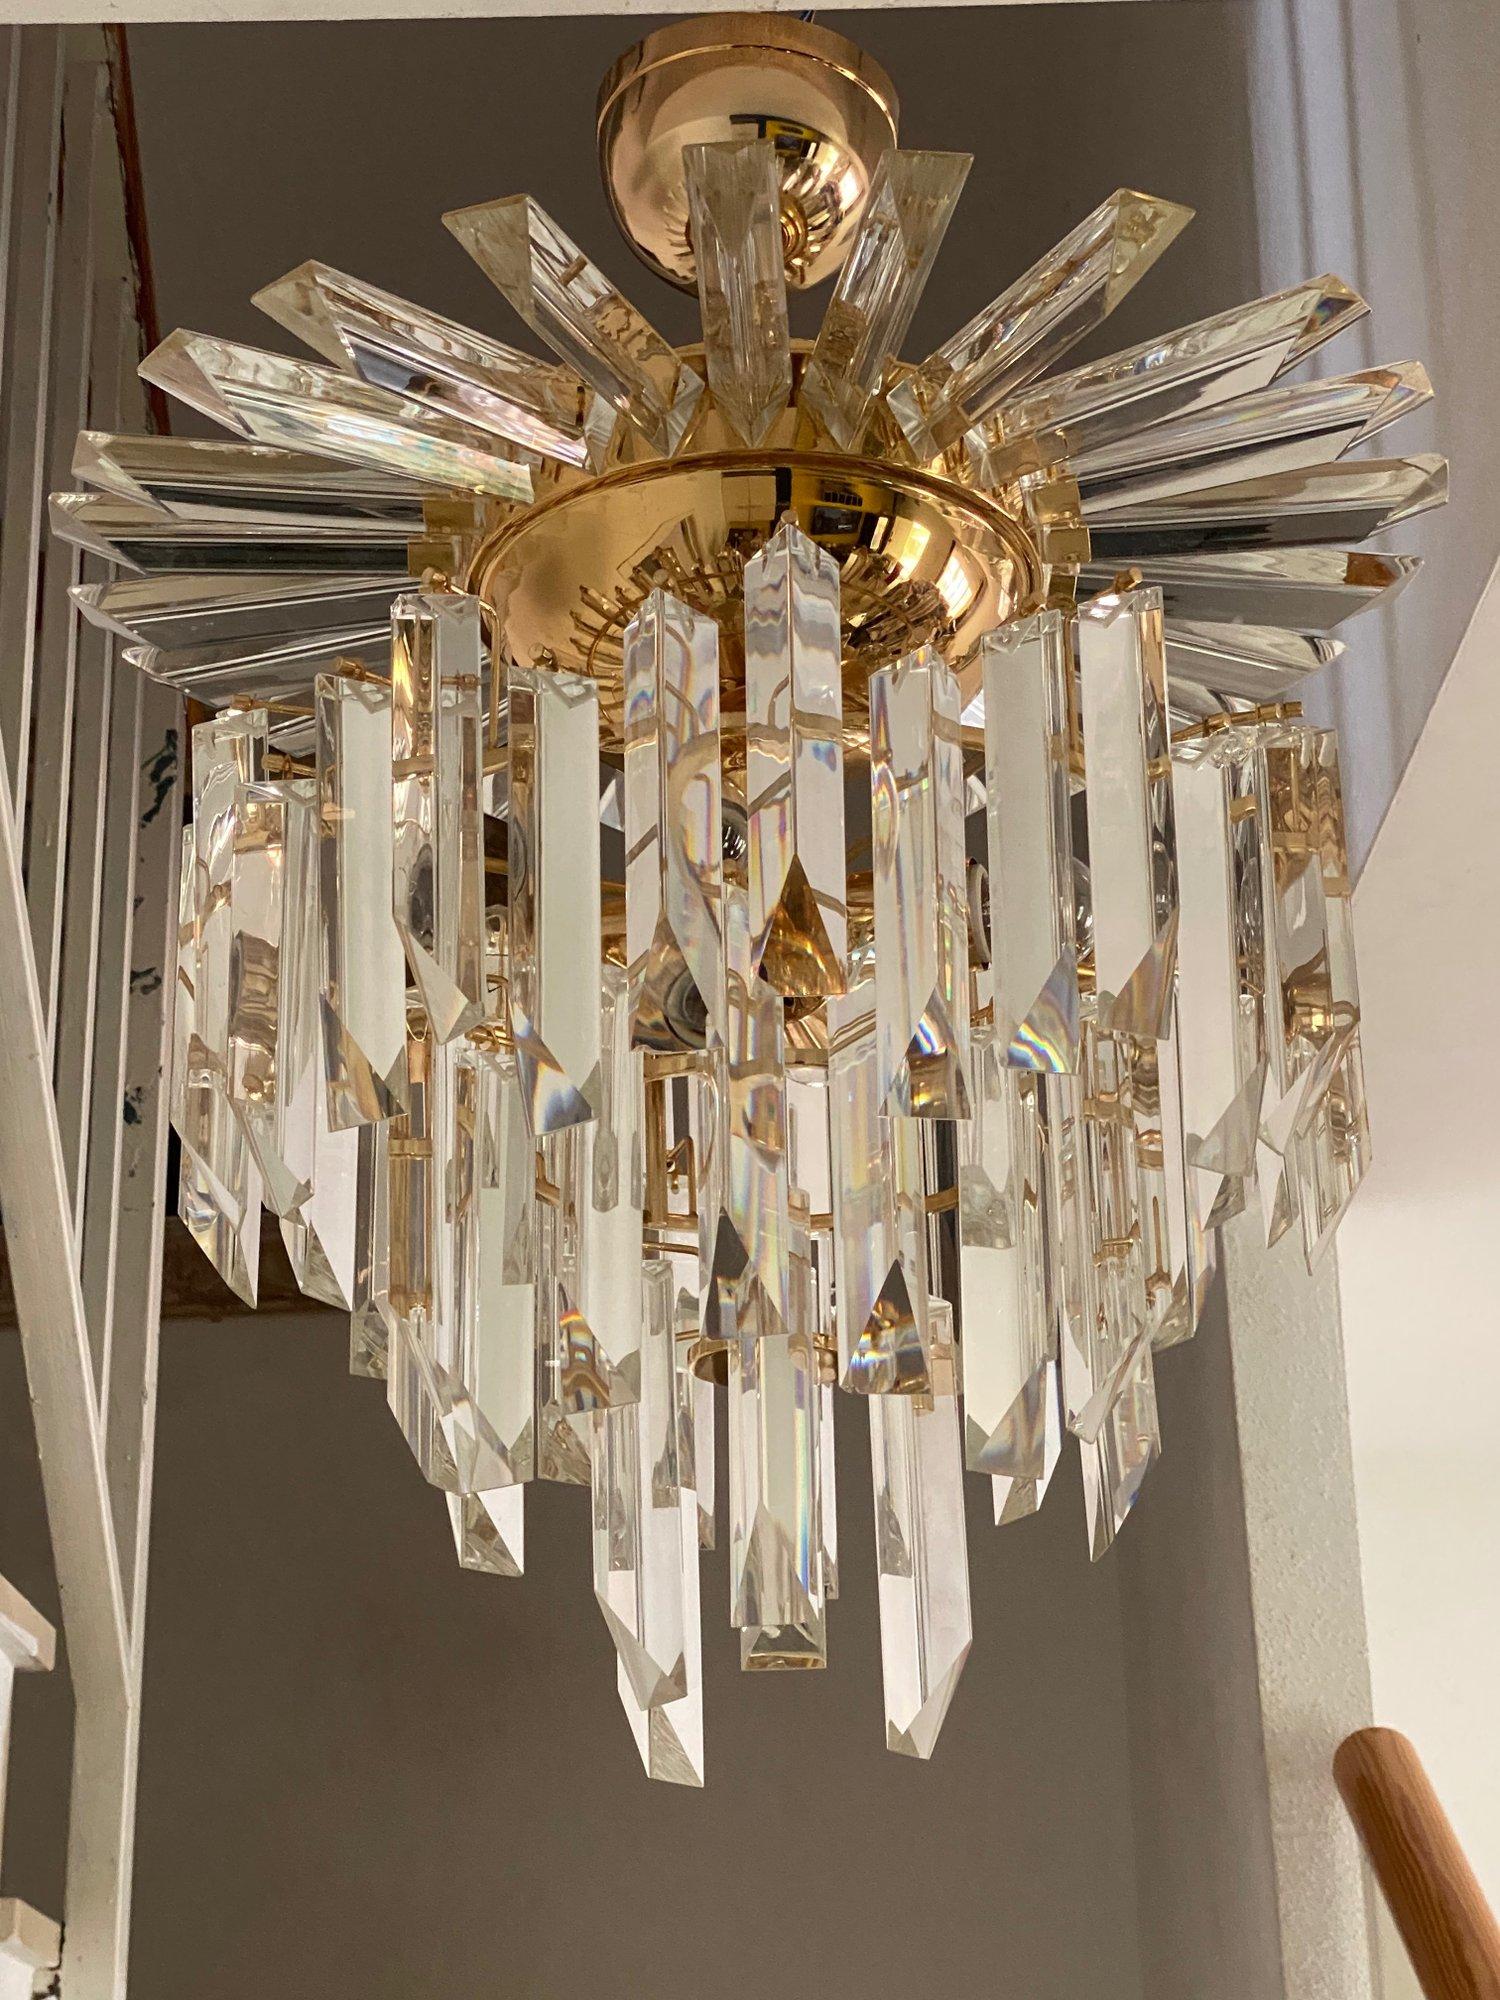 Wonderful original 1970s chandelier with crystal glass ingots.

Characteristic cascading design of glass ingots with a structure from pieces of glass hang arranged in 4 rows.
The crystals are in good overall condition, although some may have a